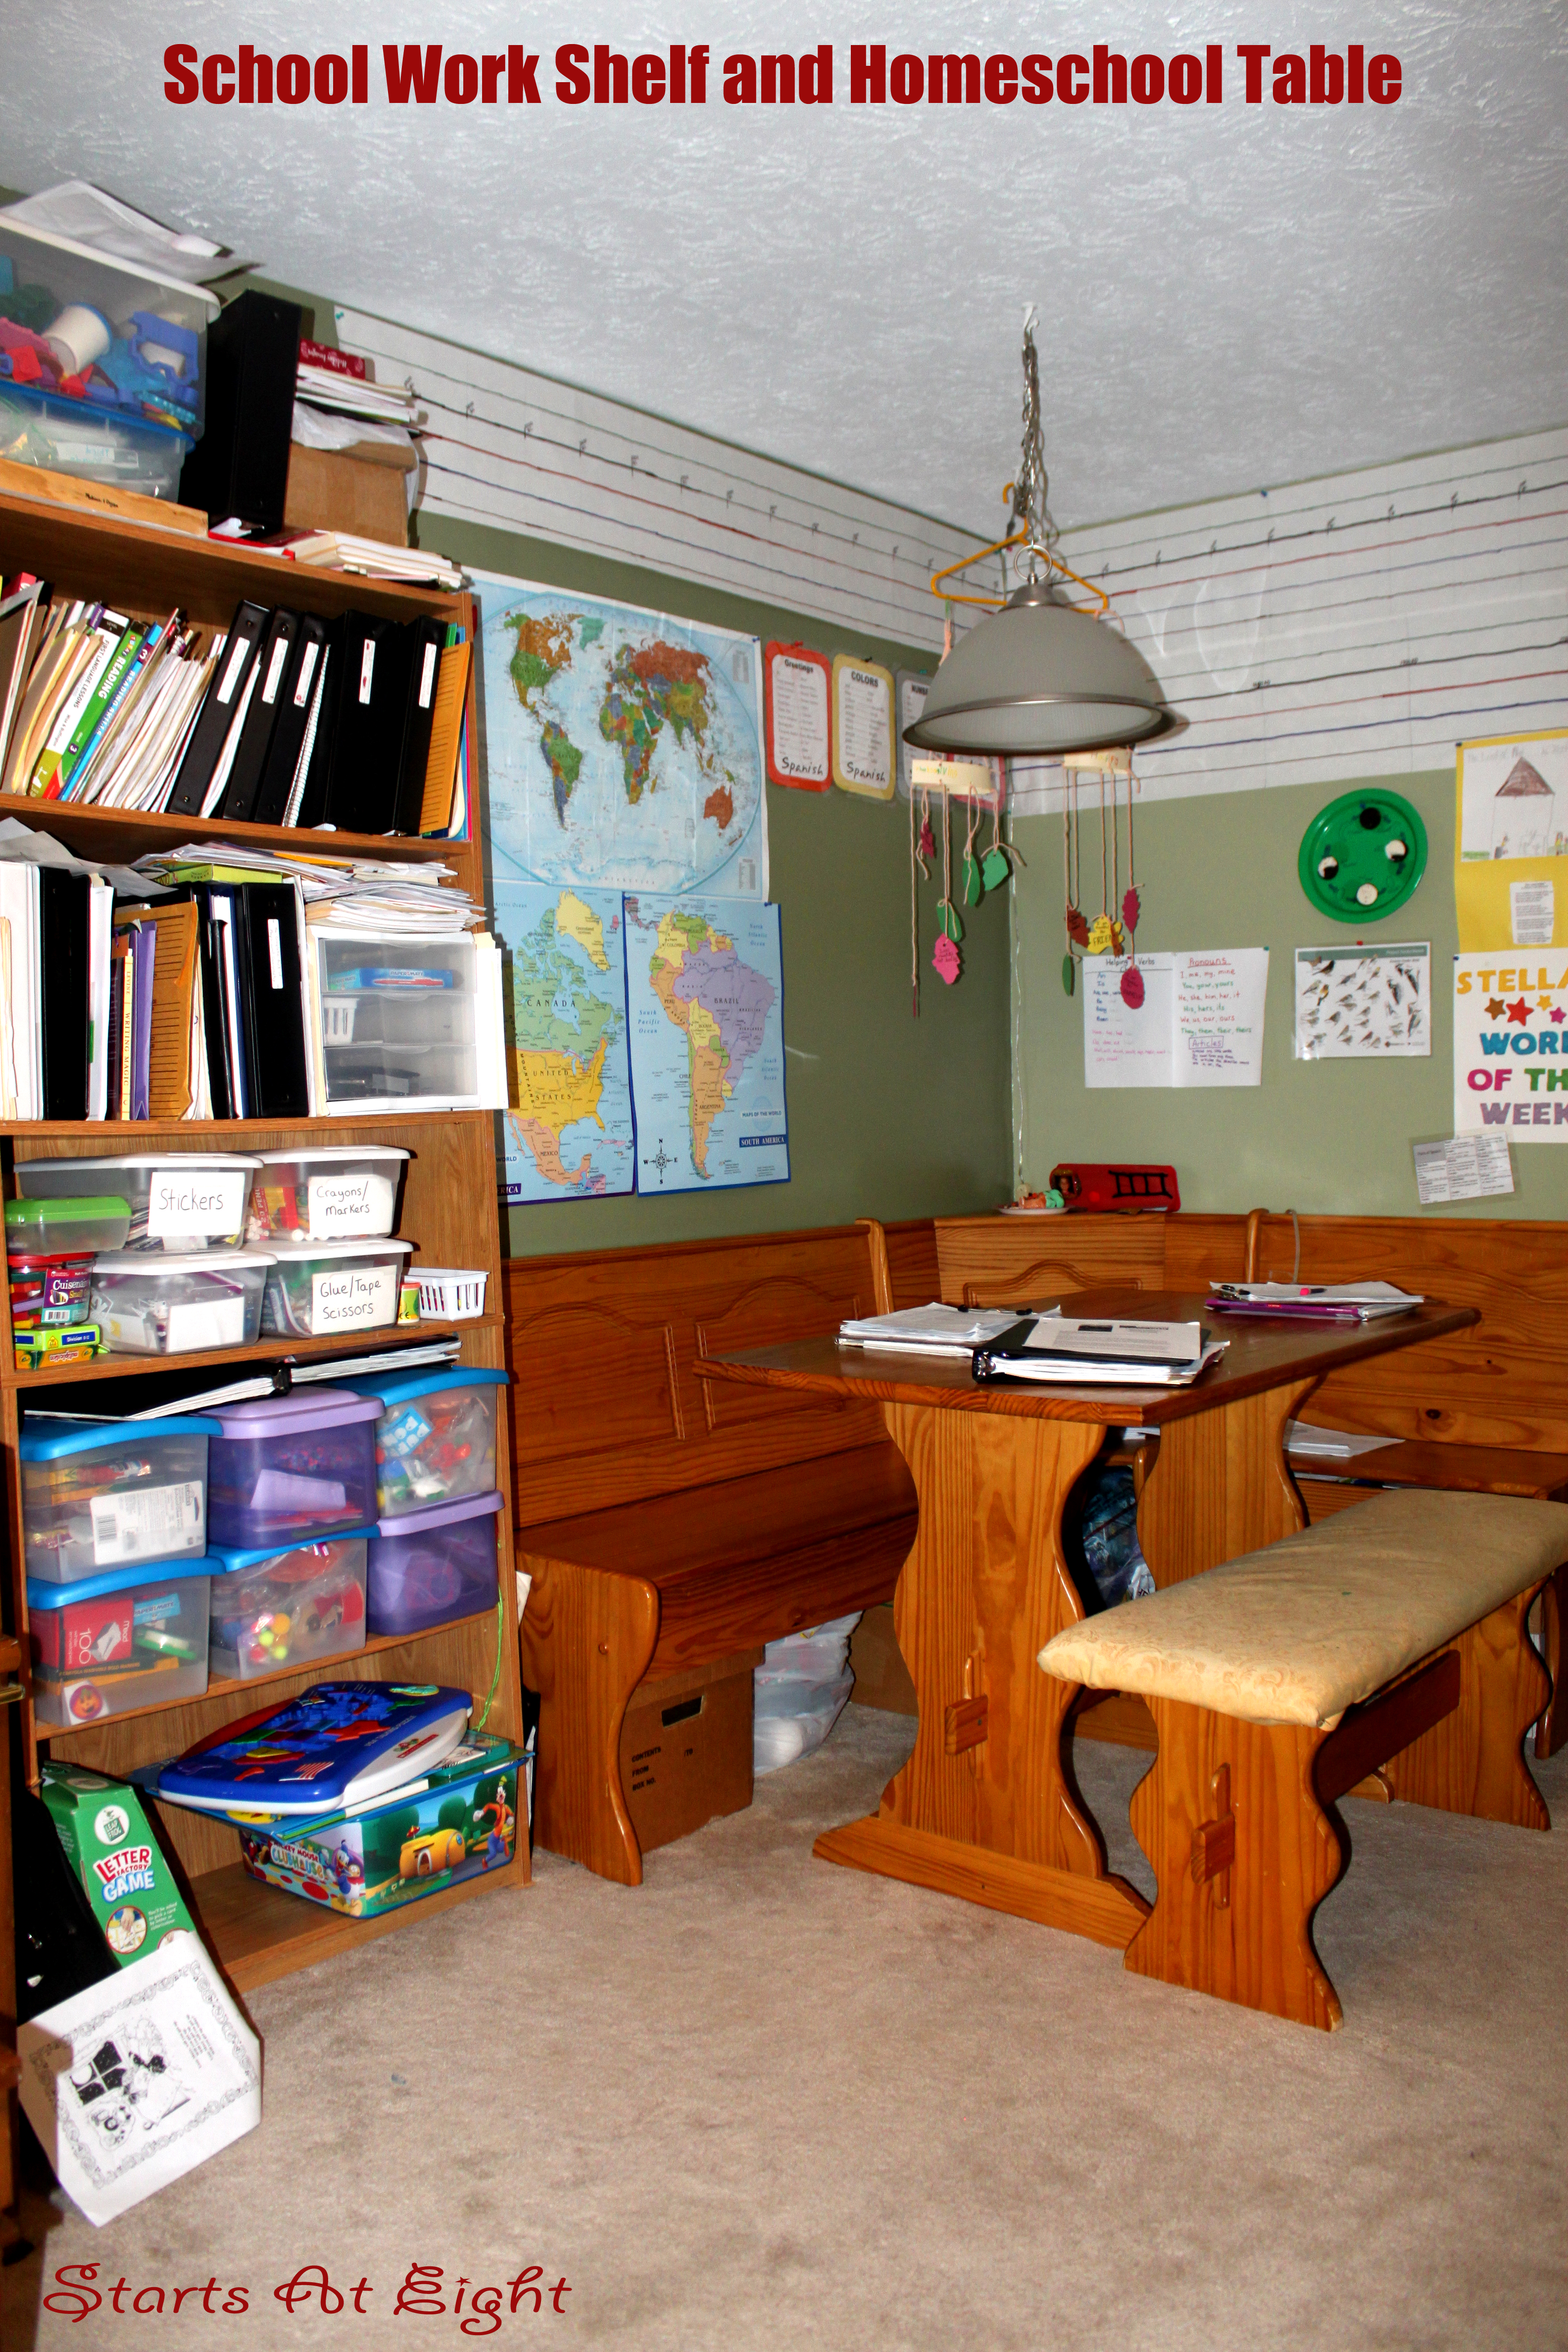 Homeschool Organization When You Don't Have a School Room